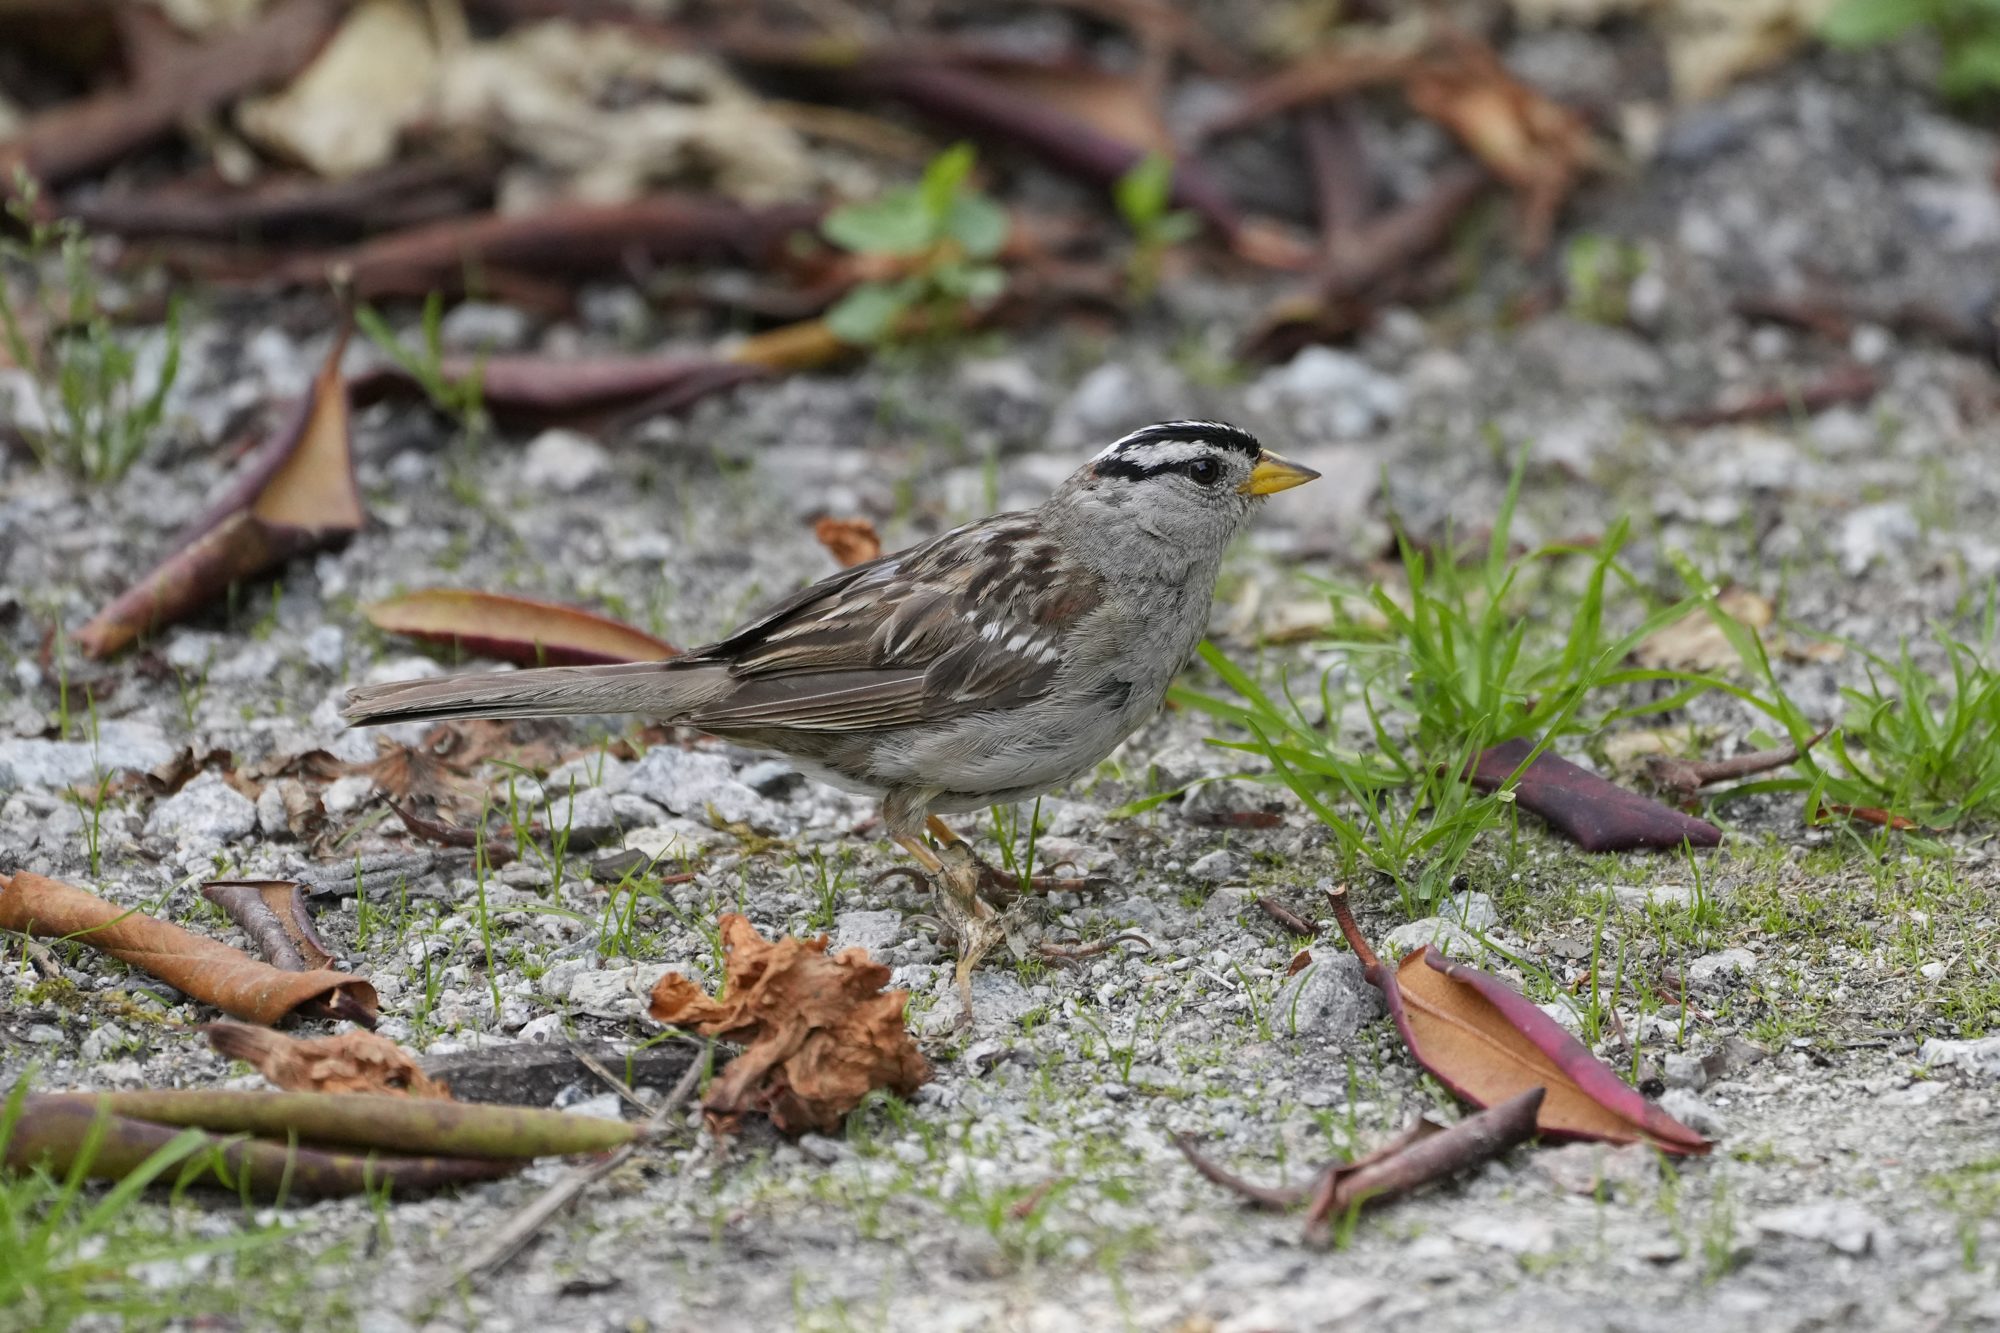 A White-crowned Sparrow standing on gravelly ground, a few dead leaves and tufts of grass around